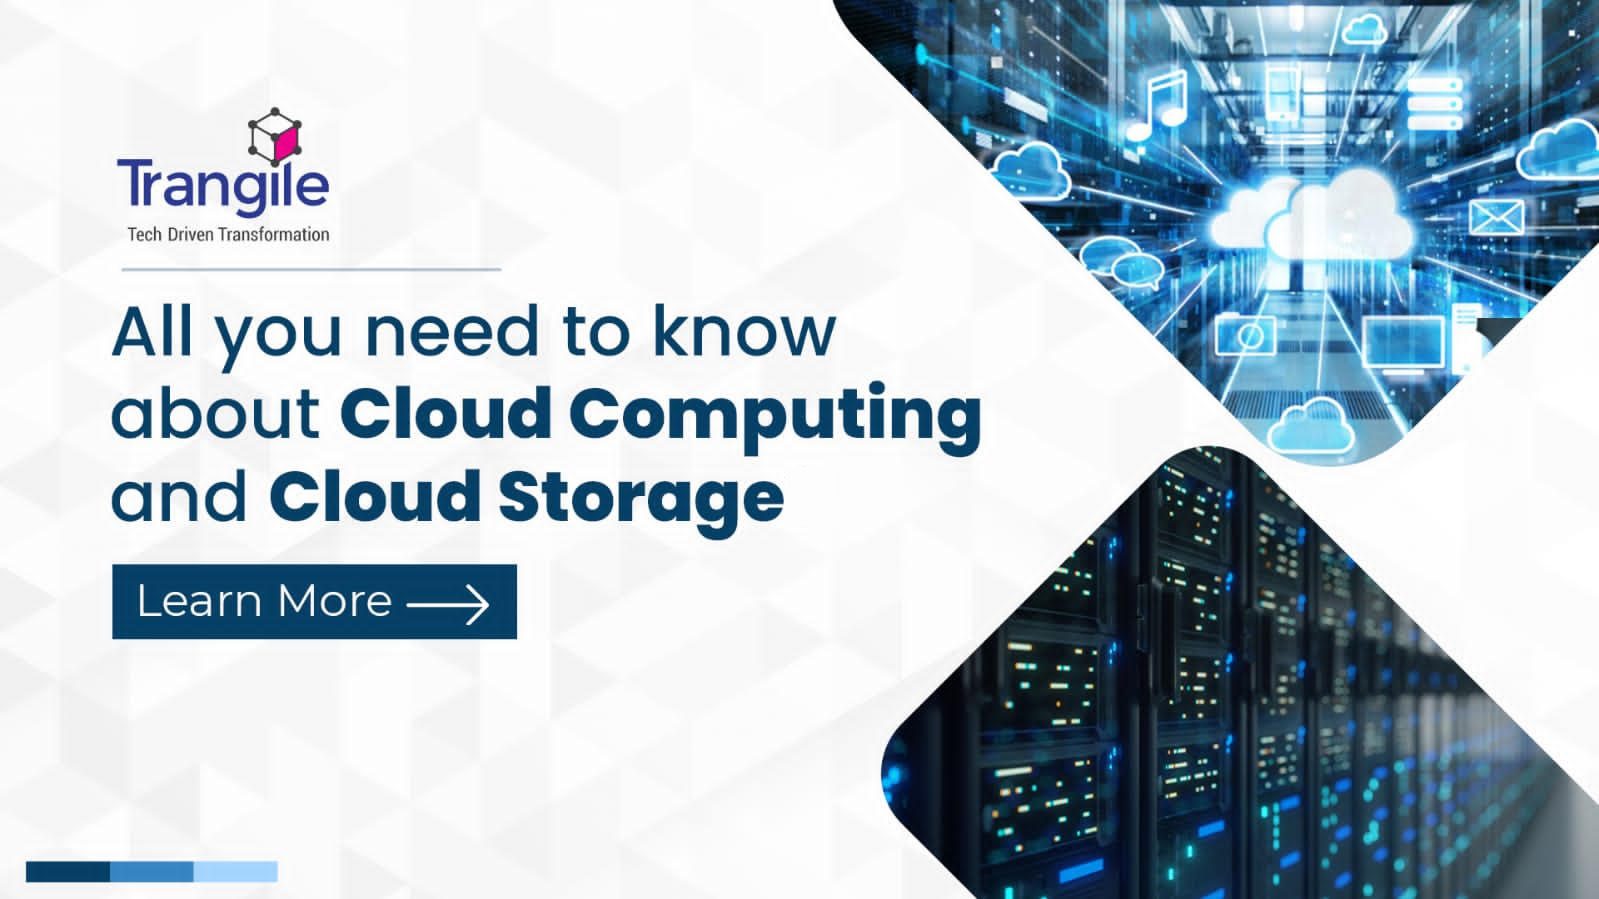 All you need to know about Cloud Computing and Cloud Storage